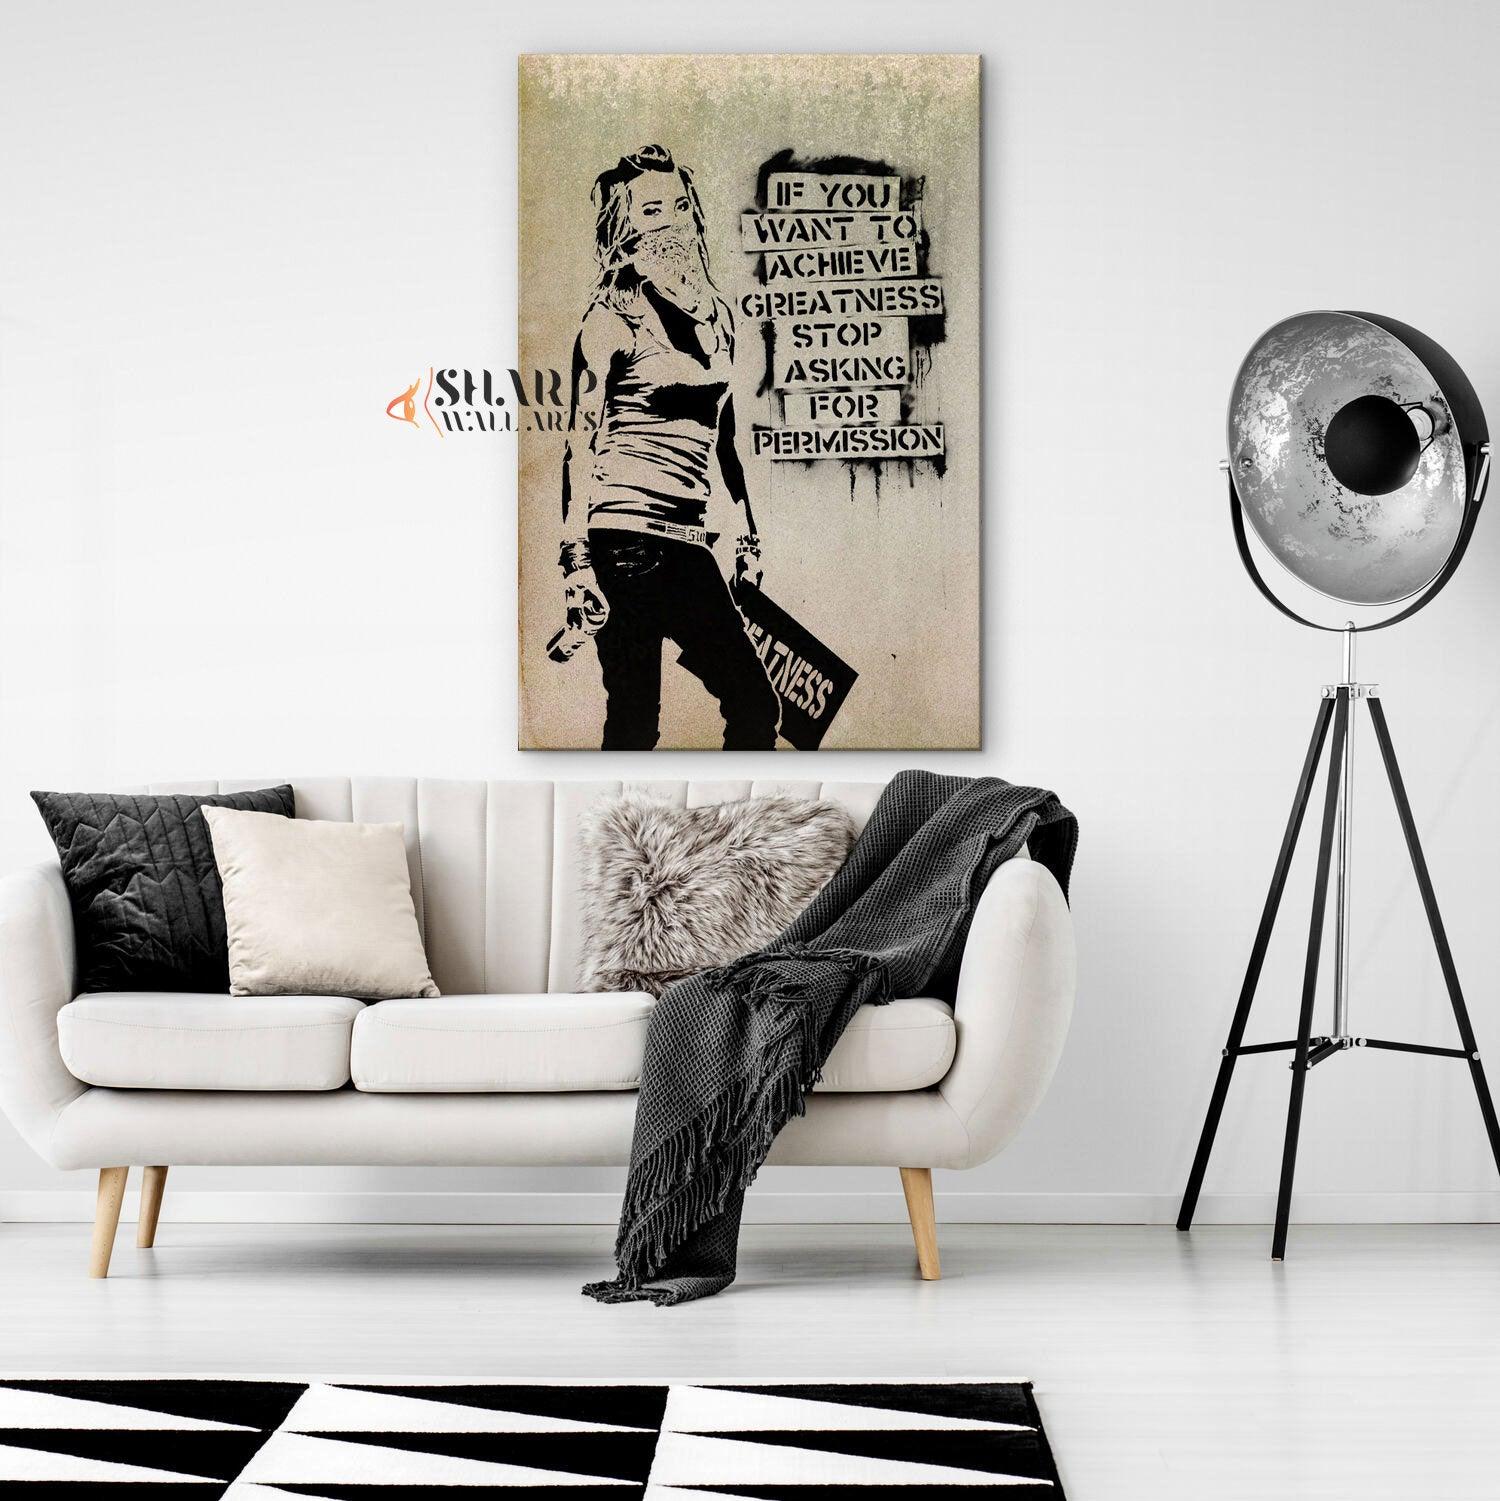 Banksy Wall Art - If you want to achieve greatness stop asking for permission - SharpWallArts